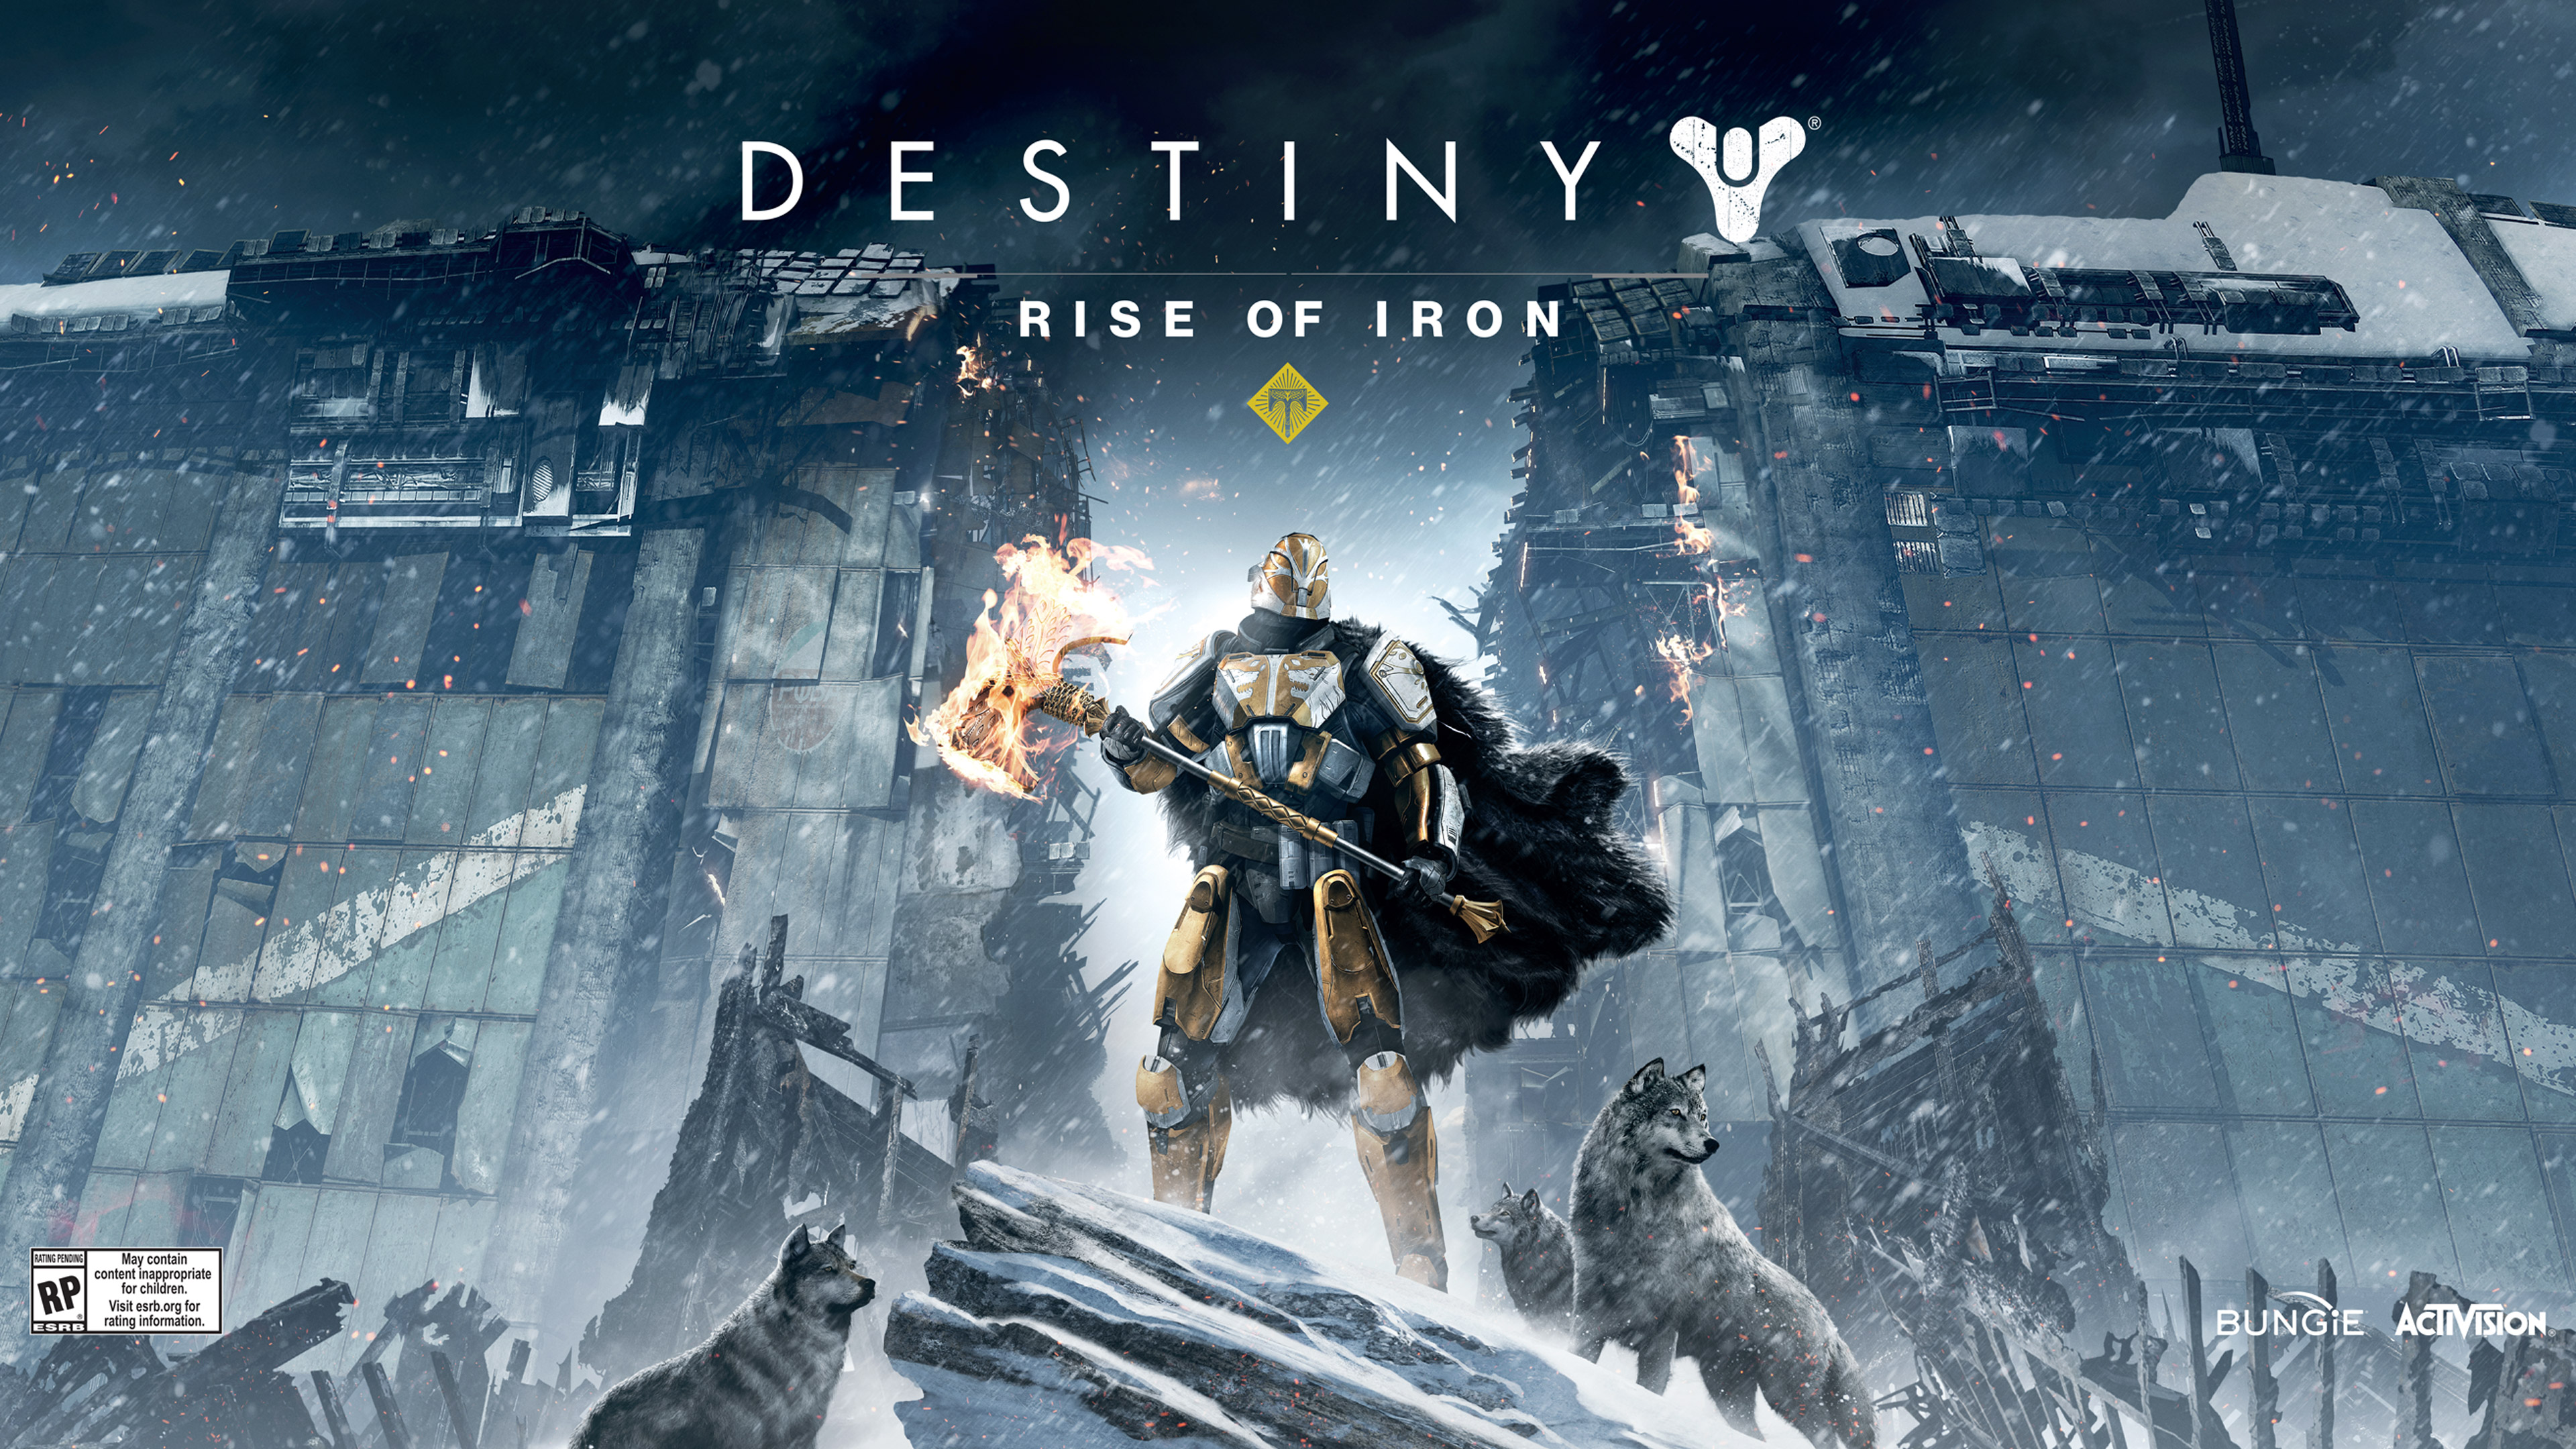 Wallpapers games artwork Destiny Rise Of Iron on the desktop